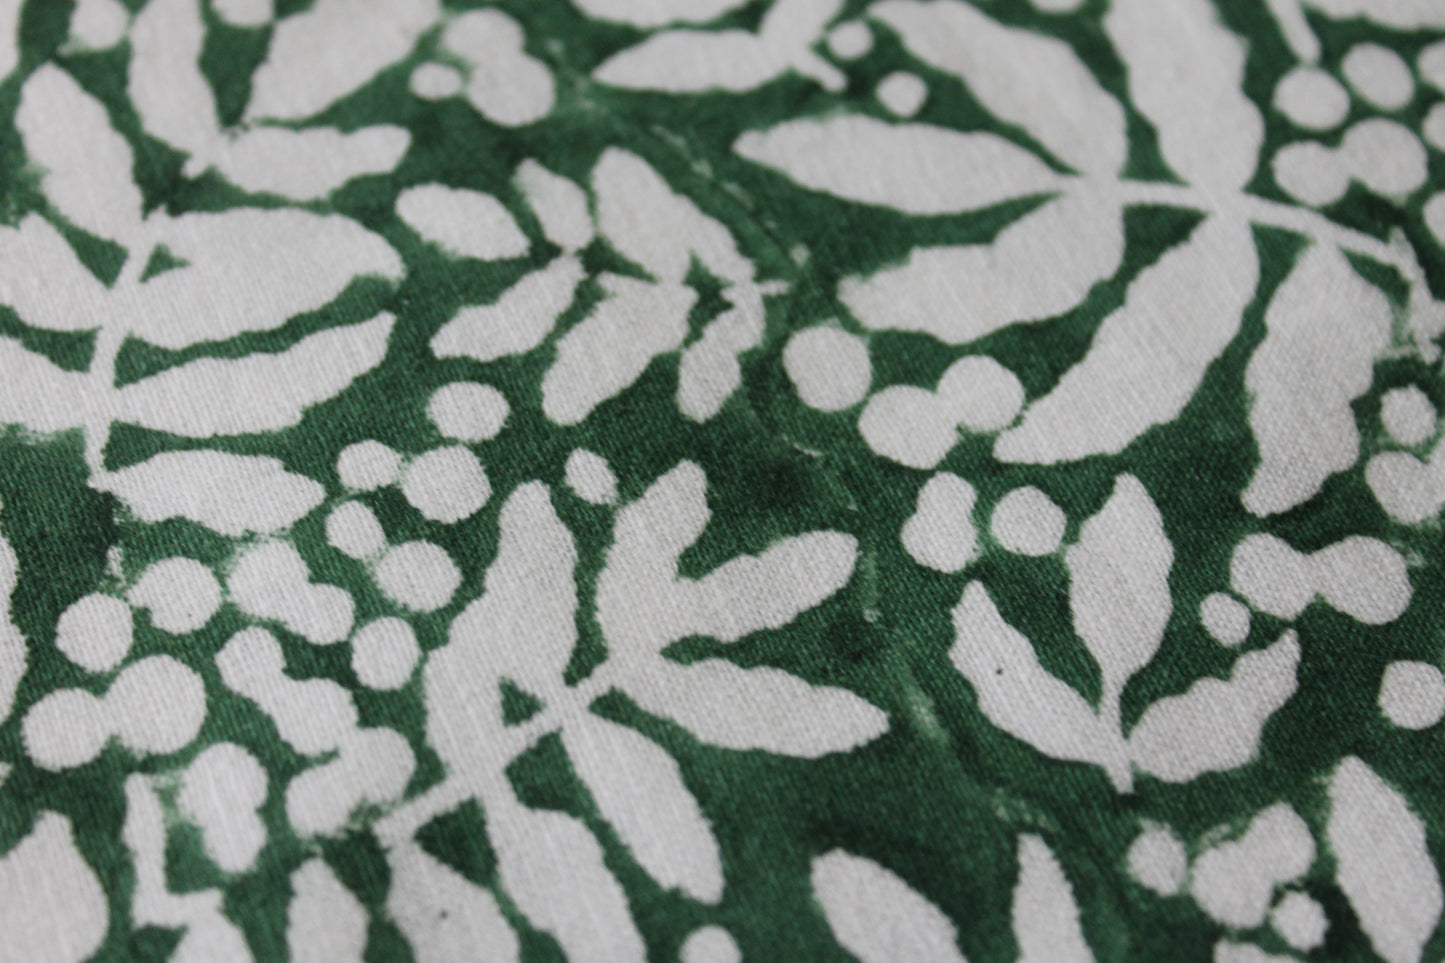 Gathered Garden Tablecloth in Pine Green